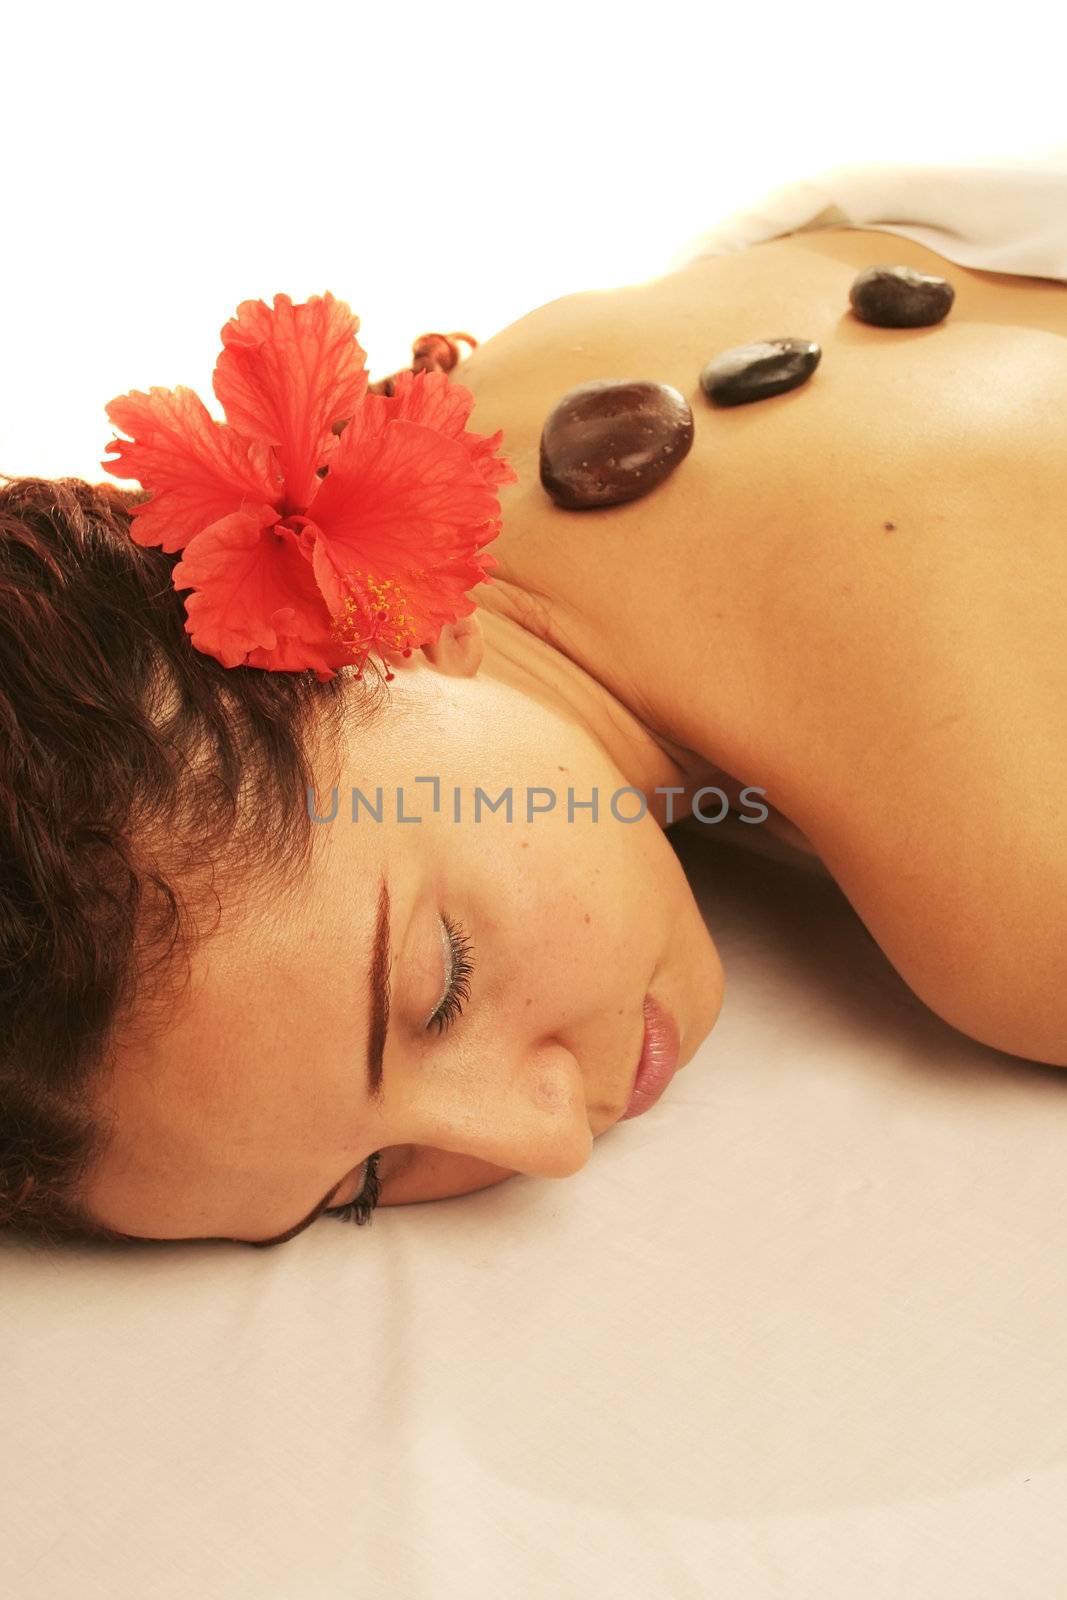 Young woman on a white massage table in a spa treatment